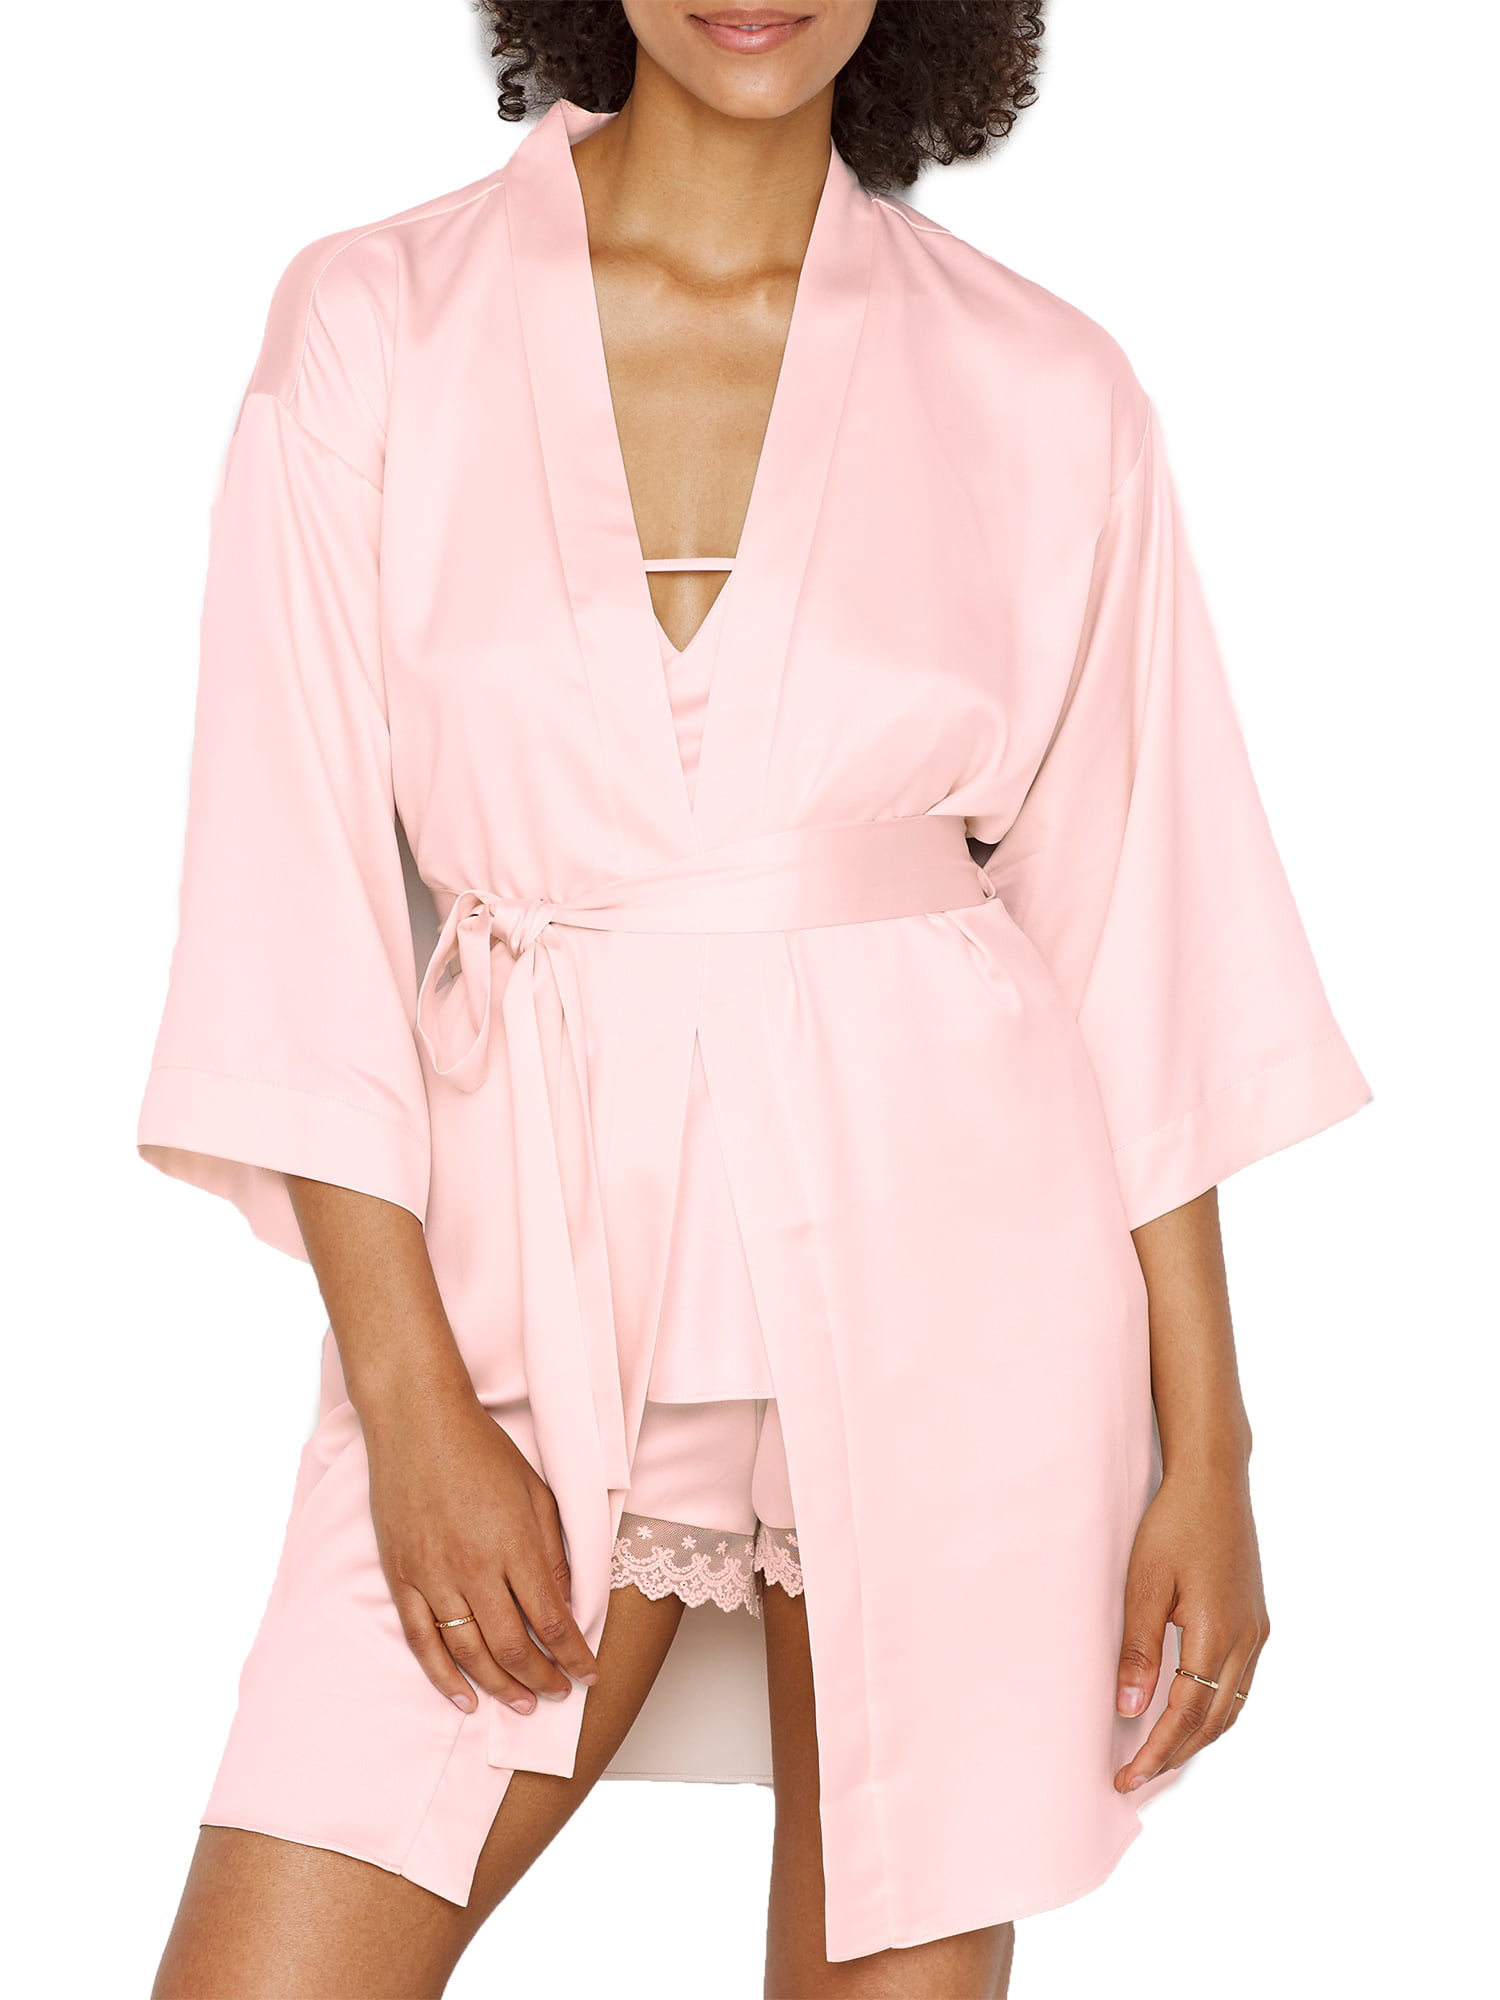 Womens Clothing Nightwear and sleepwear Robes Flora Nikrooz Synthetic Viola Charmeuse Robe in Taupe Pink robe dresses and bathrobes 